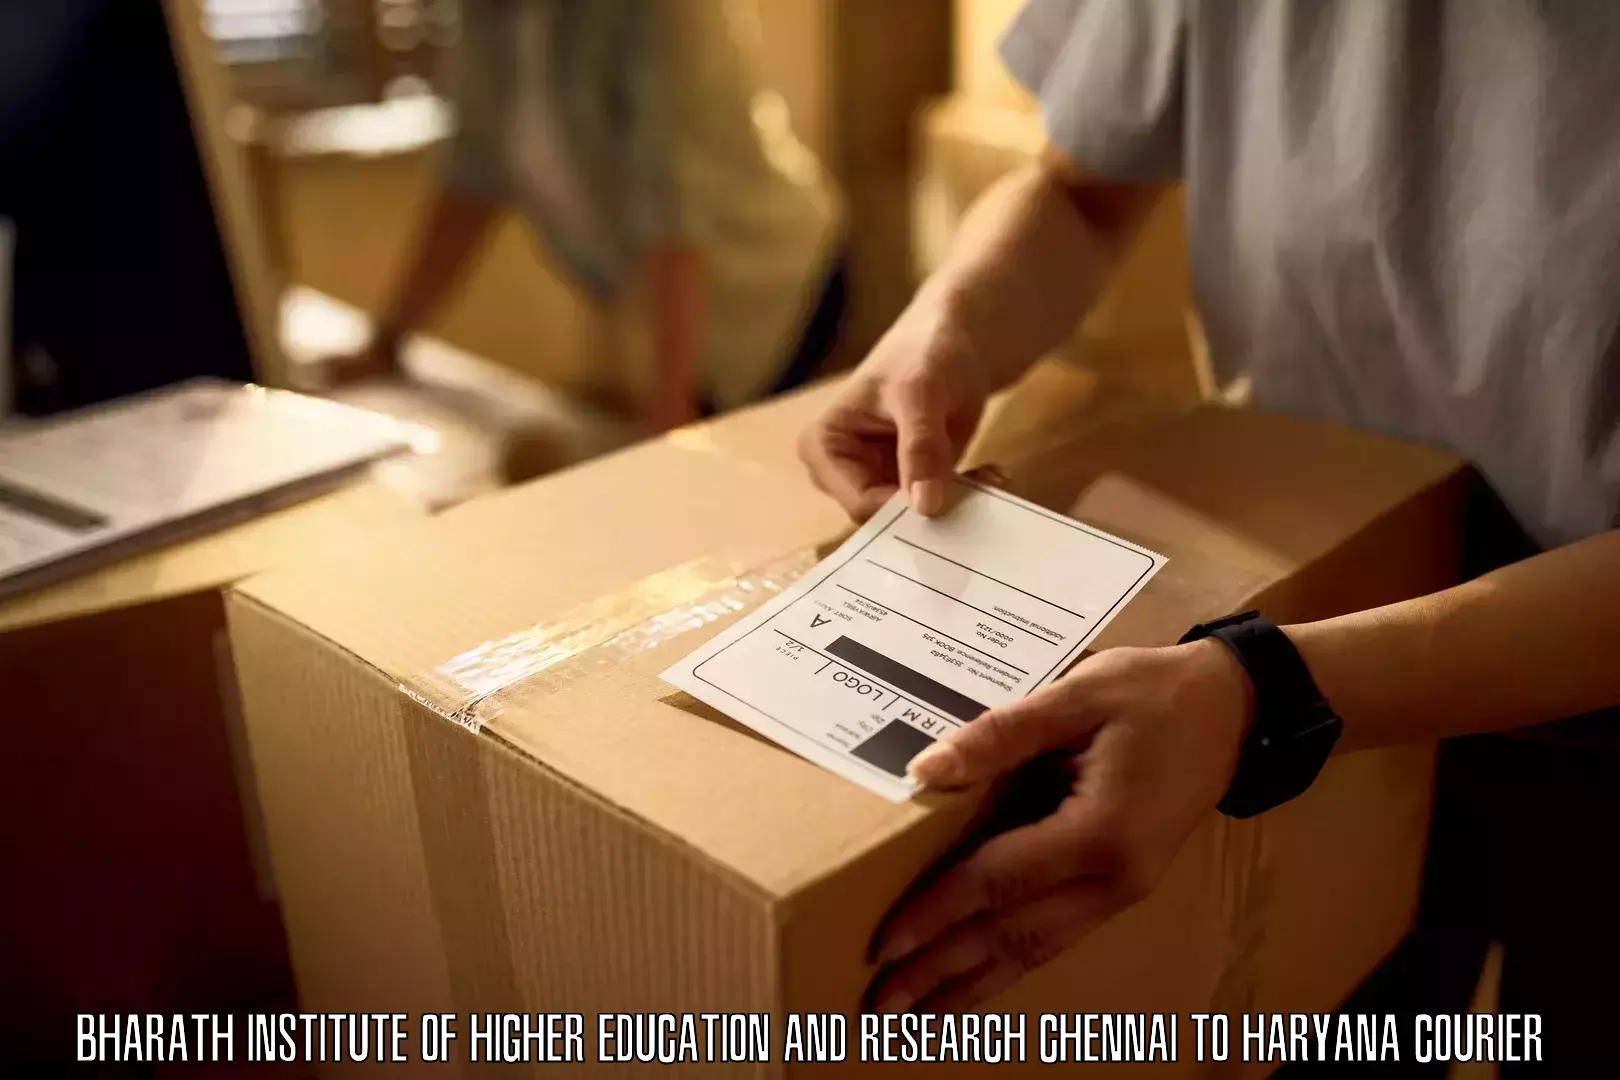 Express delivery capabilities Bharath Institute of Higher Education and Research Chennai to Haryana